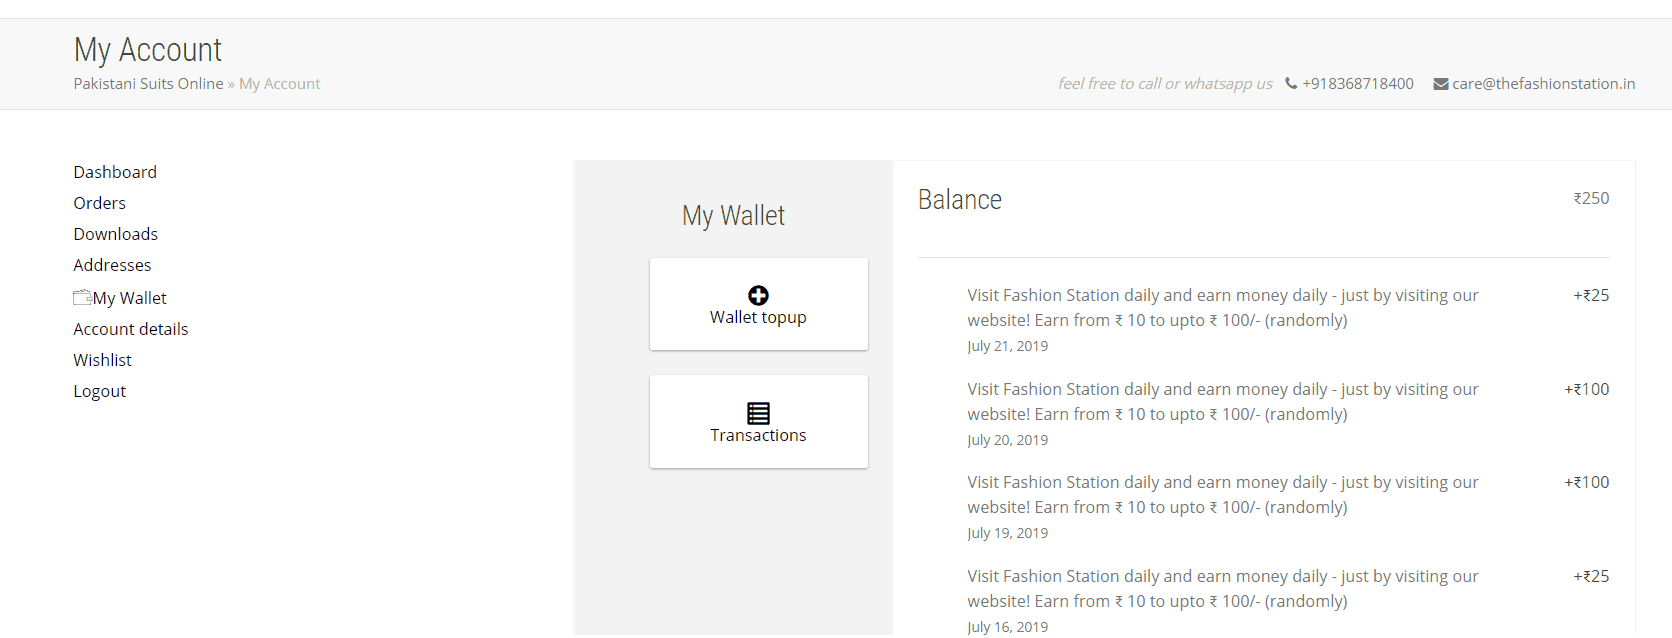 How to Use FSTN Wallet